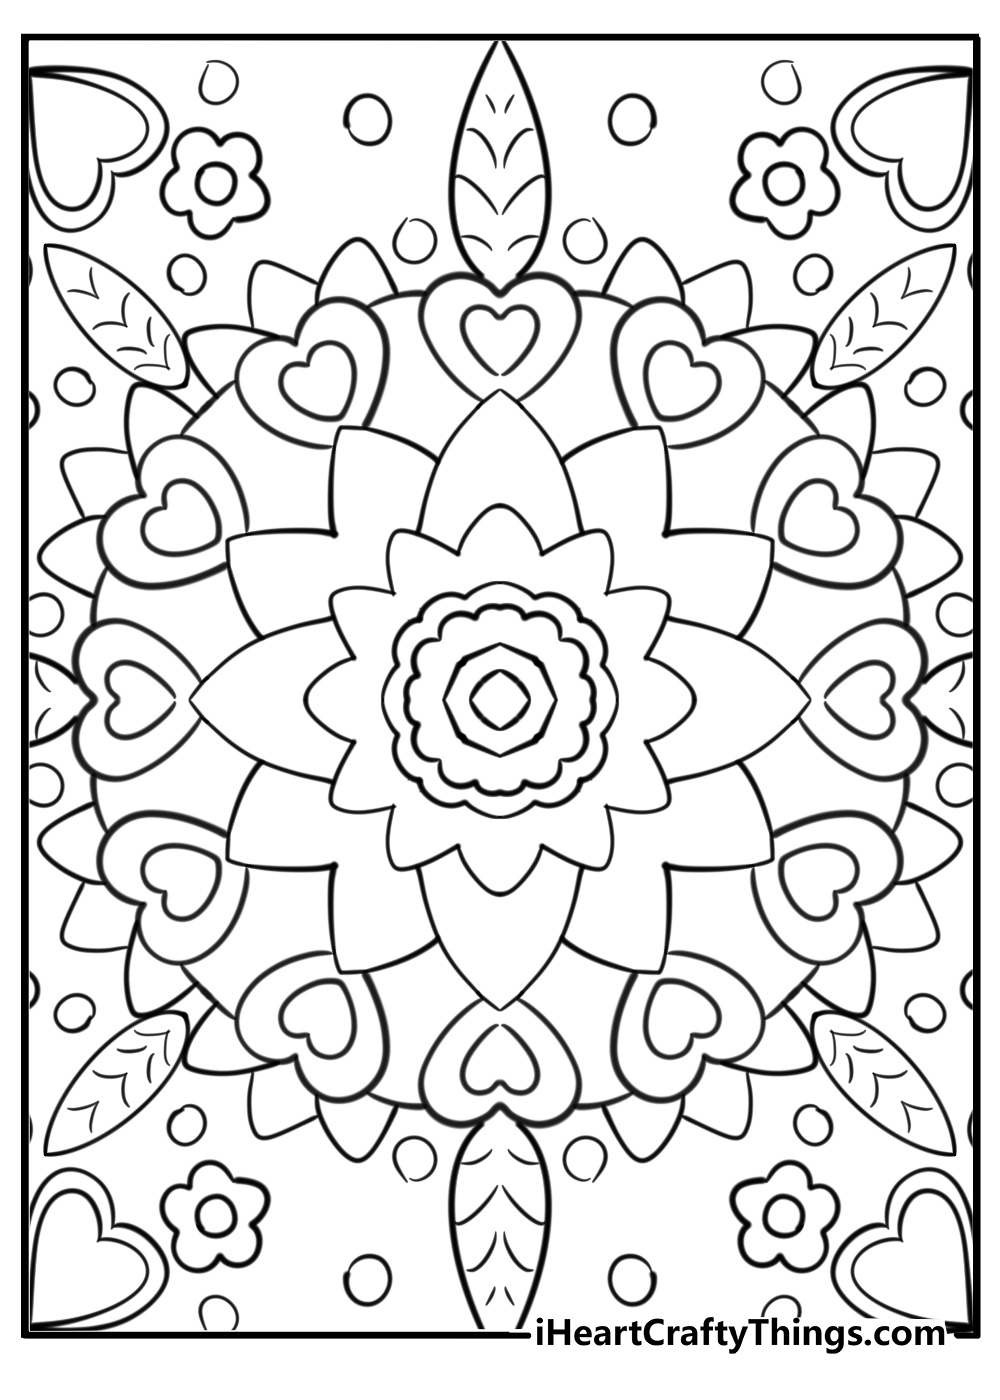 Printable mandala coloring pages for adults